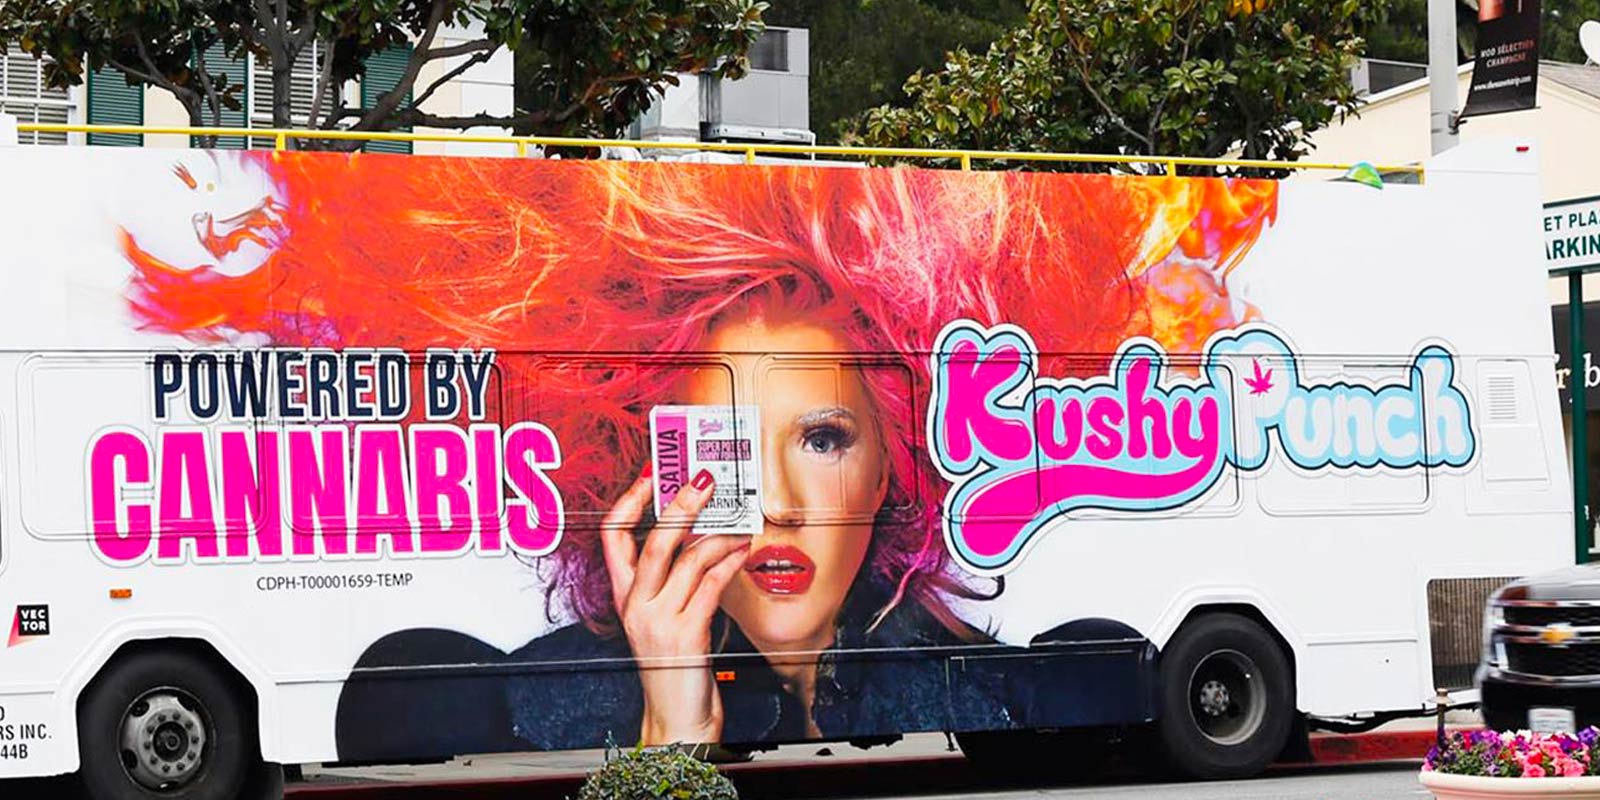 Advertising for Generation A | Z | Y - KushyPunch - Cannabis Campaign, Los Angeles